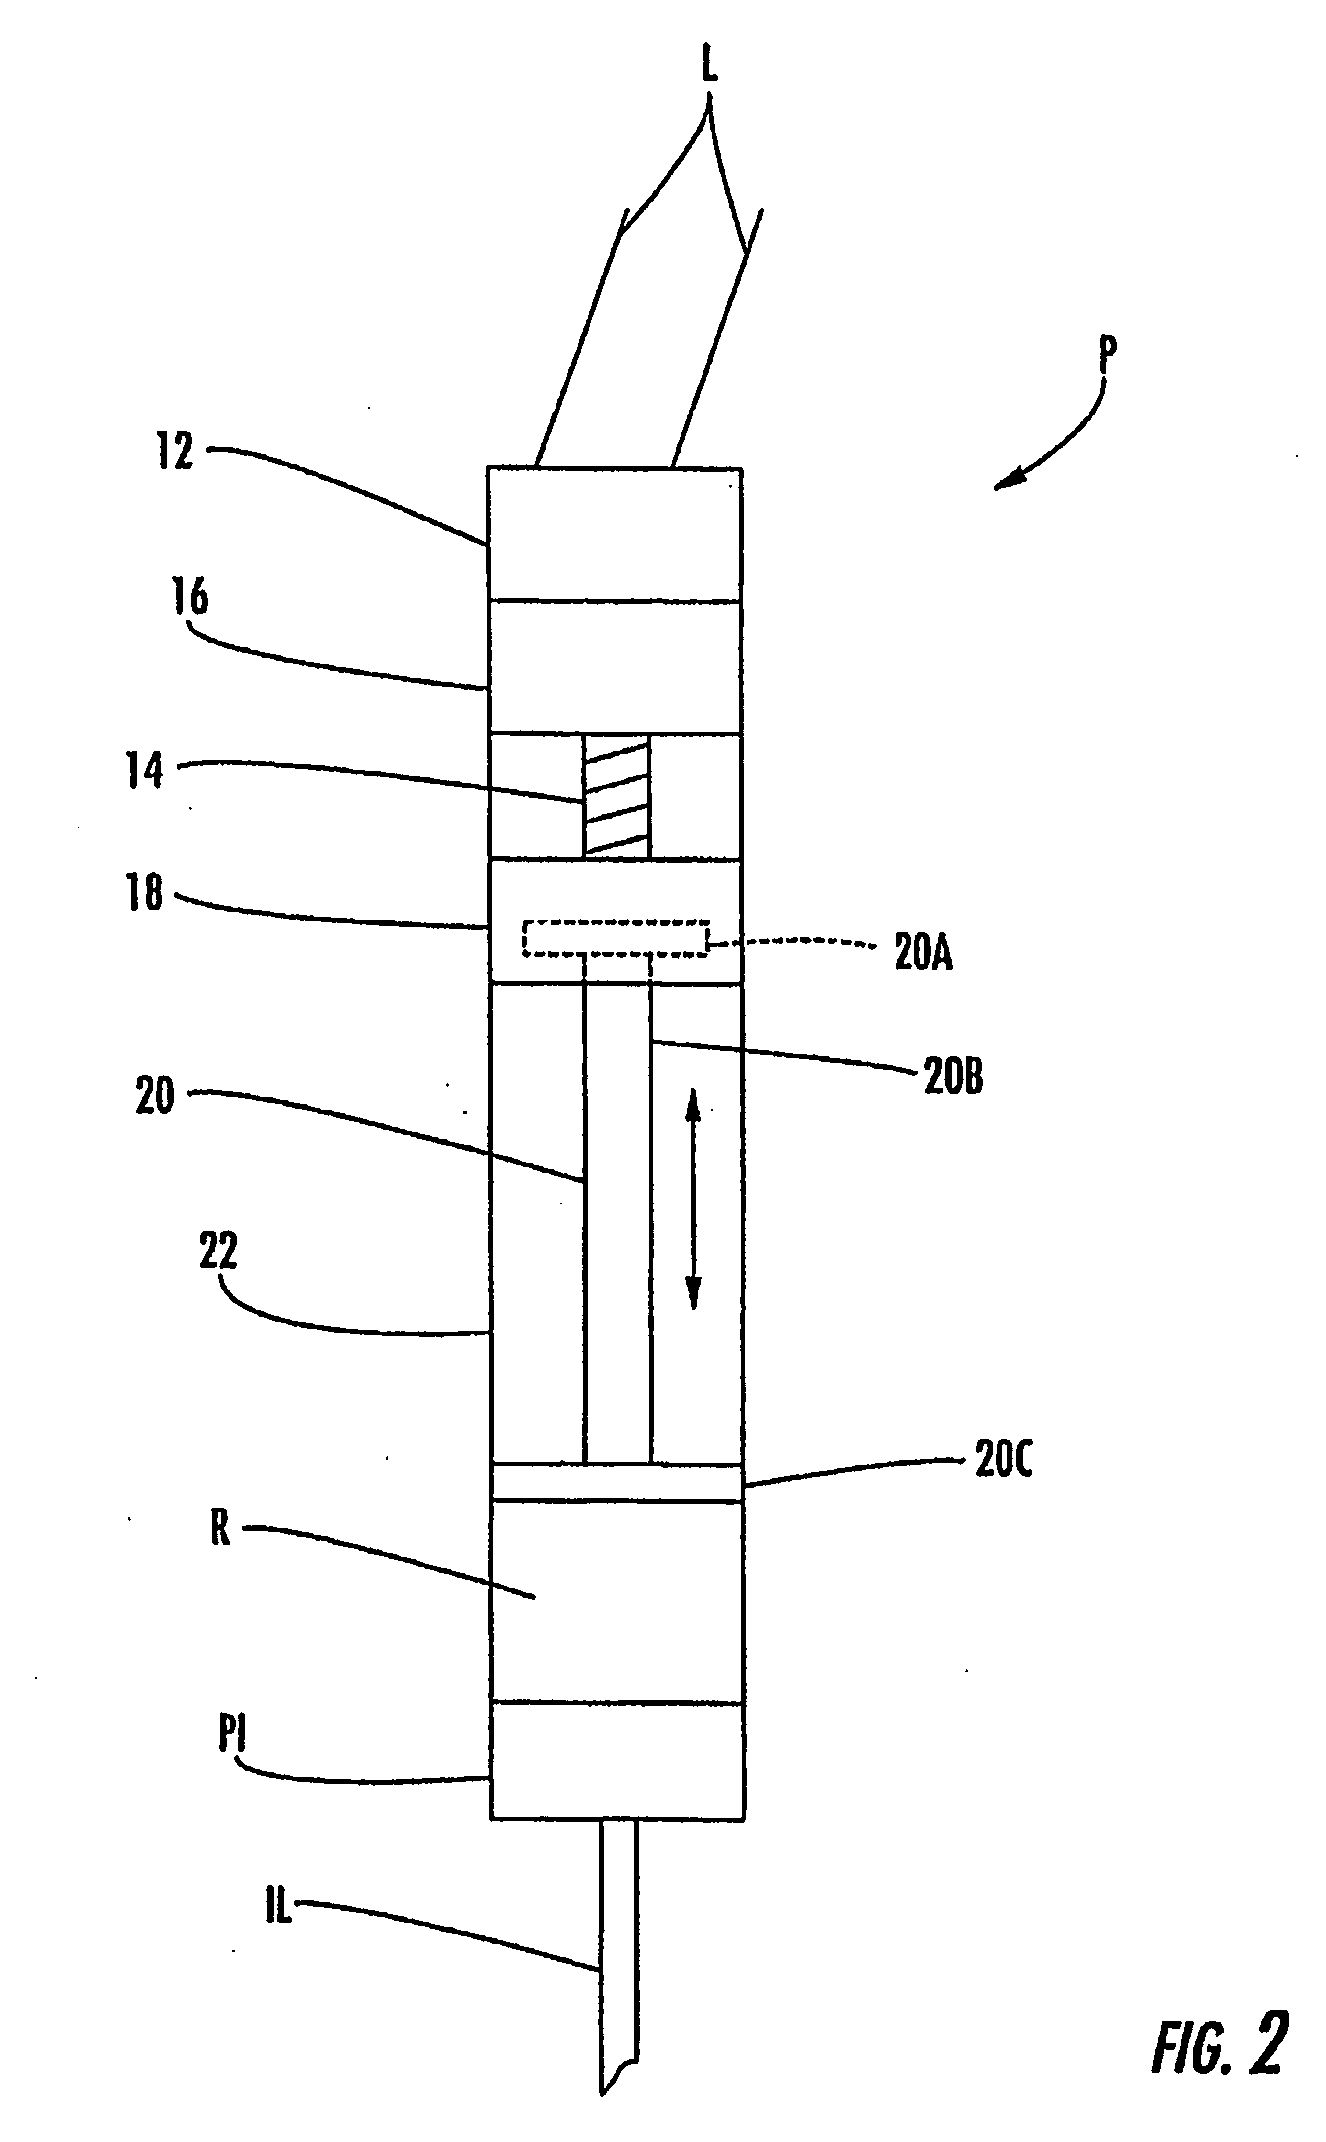 Microfluid based apparatus and method for thermal regulation and noise reduction